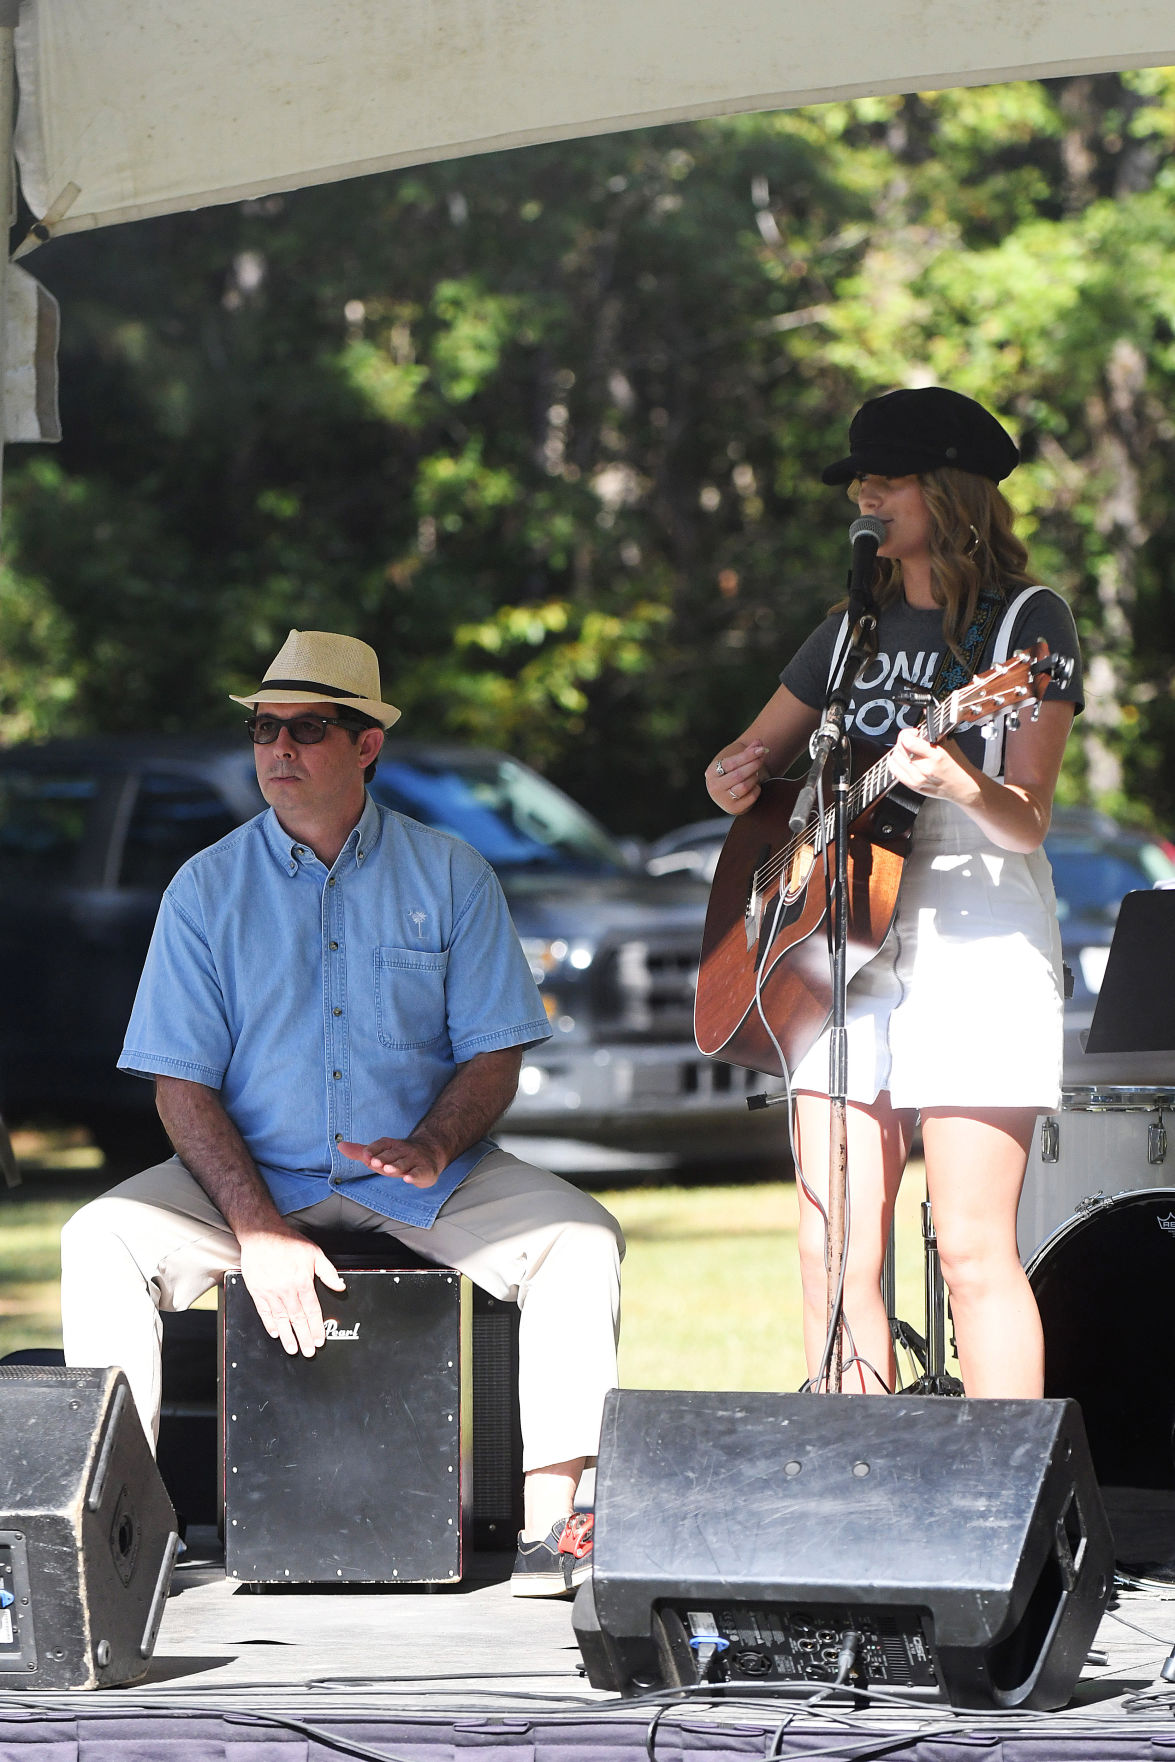 Faith Schueler and Robby Robbins perform on Friday, October 11, 2019 at the Edisto Blackwater Boogie held at Givhans Ferry State Park. By Joy Bonala